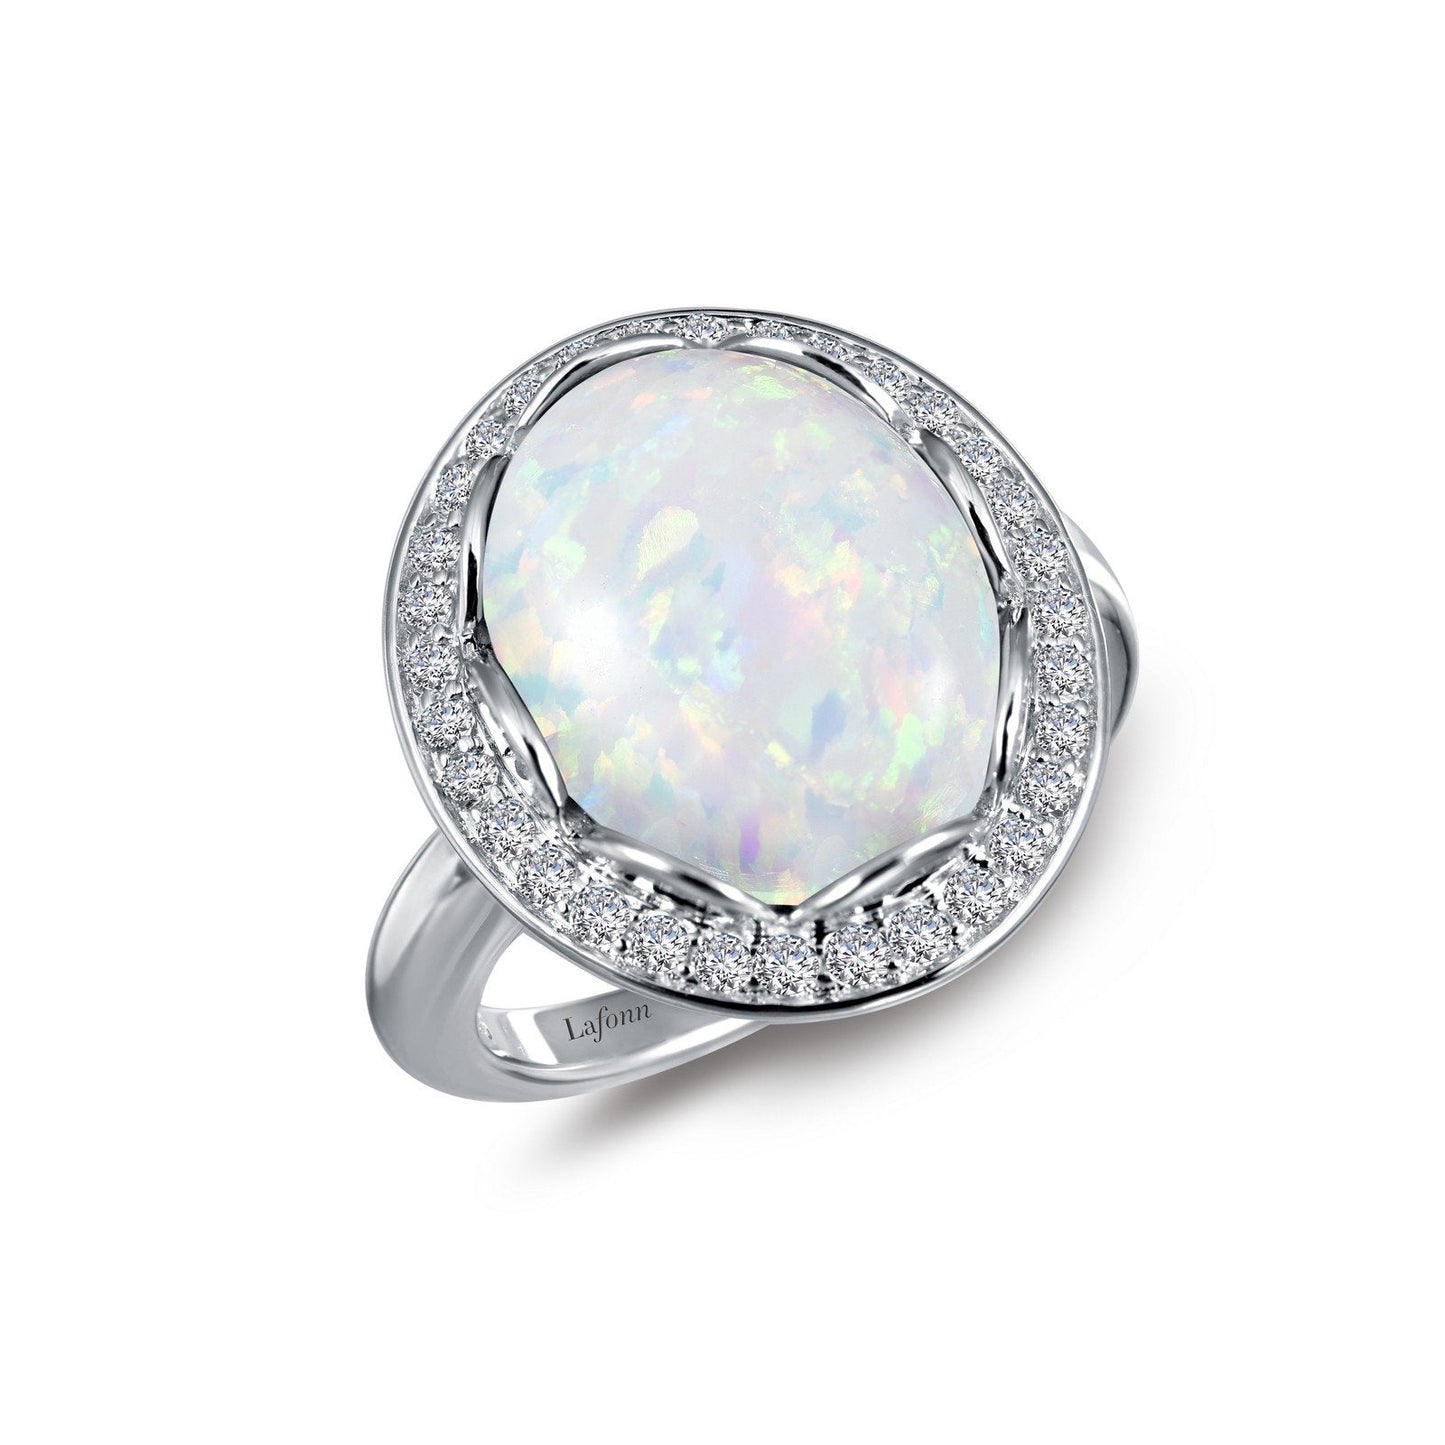 LaFonn Platinum Opal  14x11mm Oval, Opal N/A CTW RINGS Art Deco Inspired Halo Ring